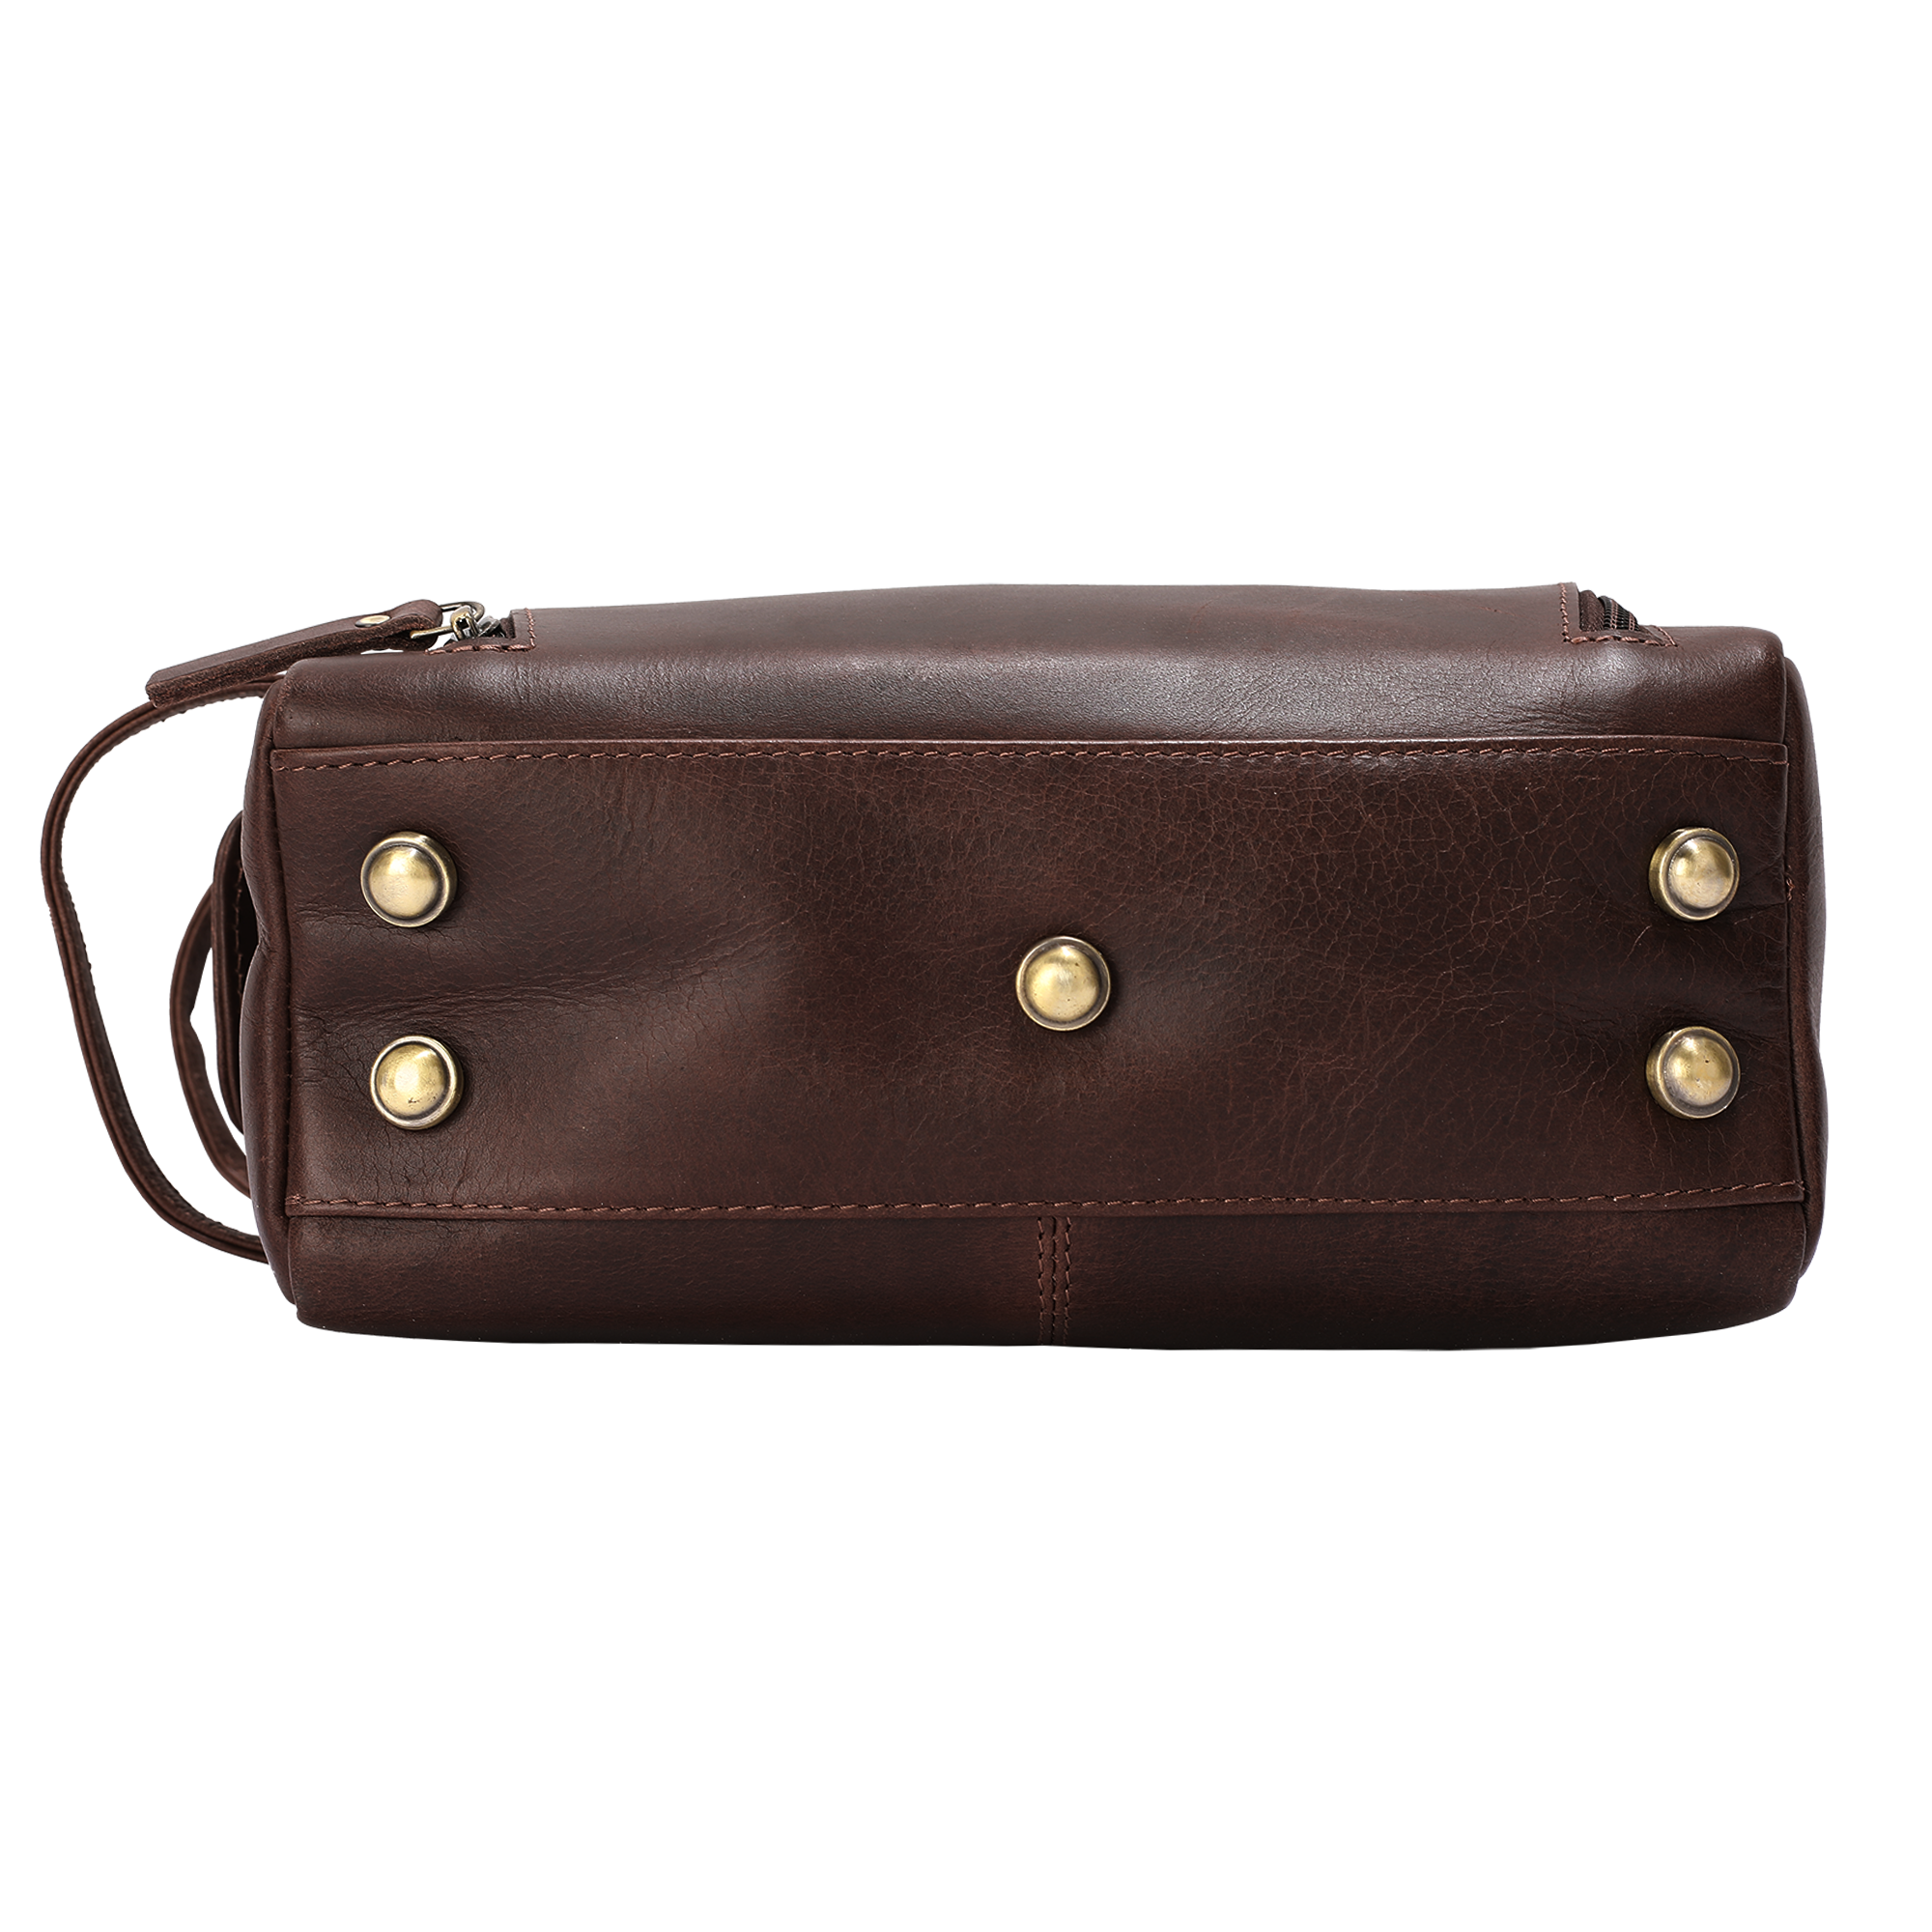 Leather Toiletry Bag Dopp Kit - Hickory (X-Large)